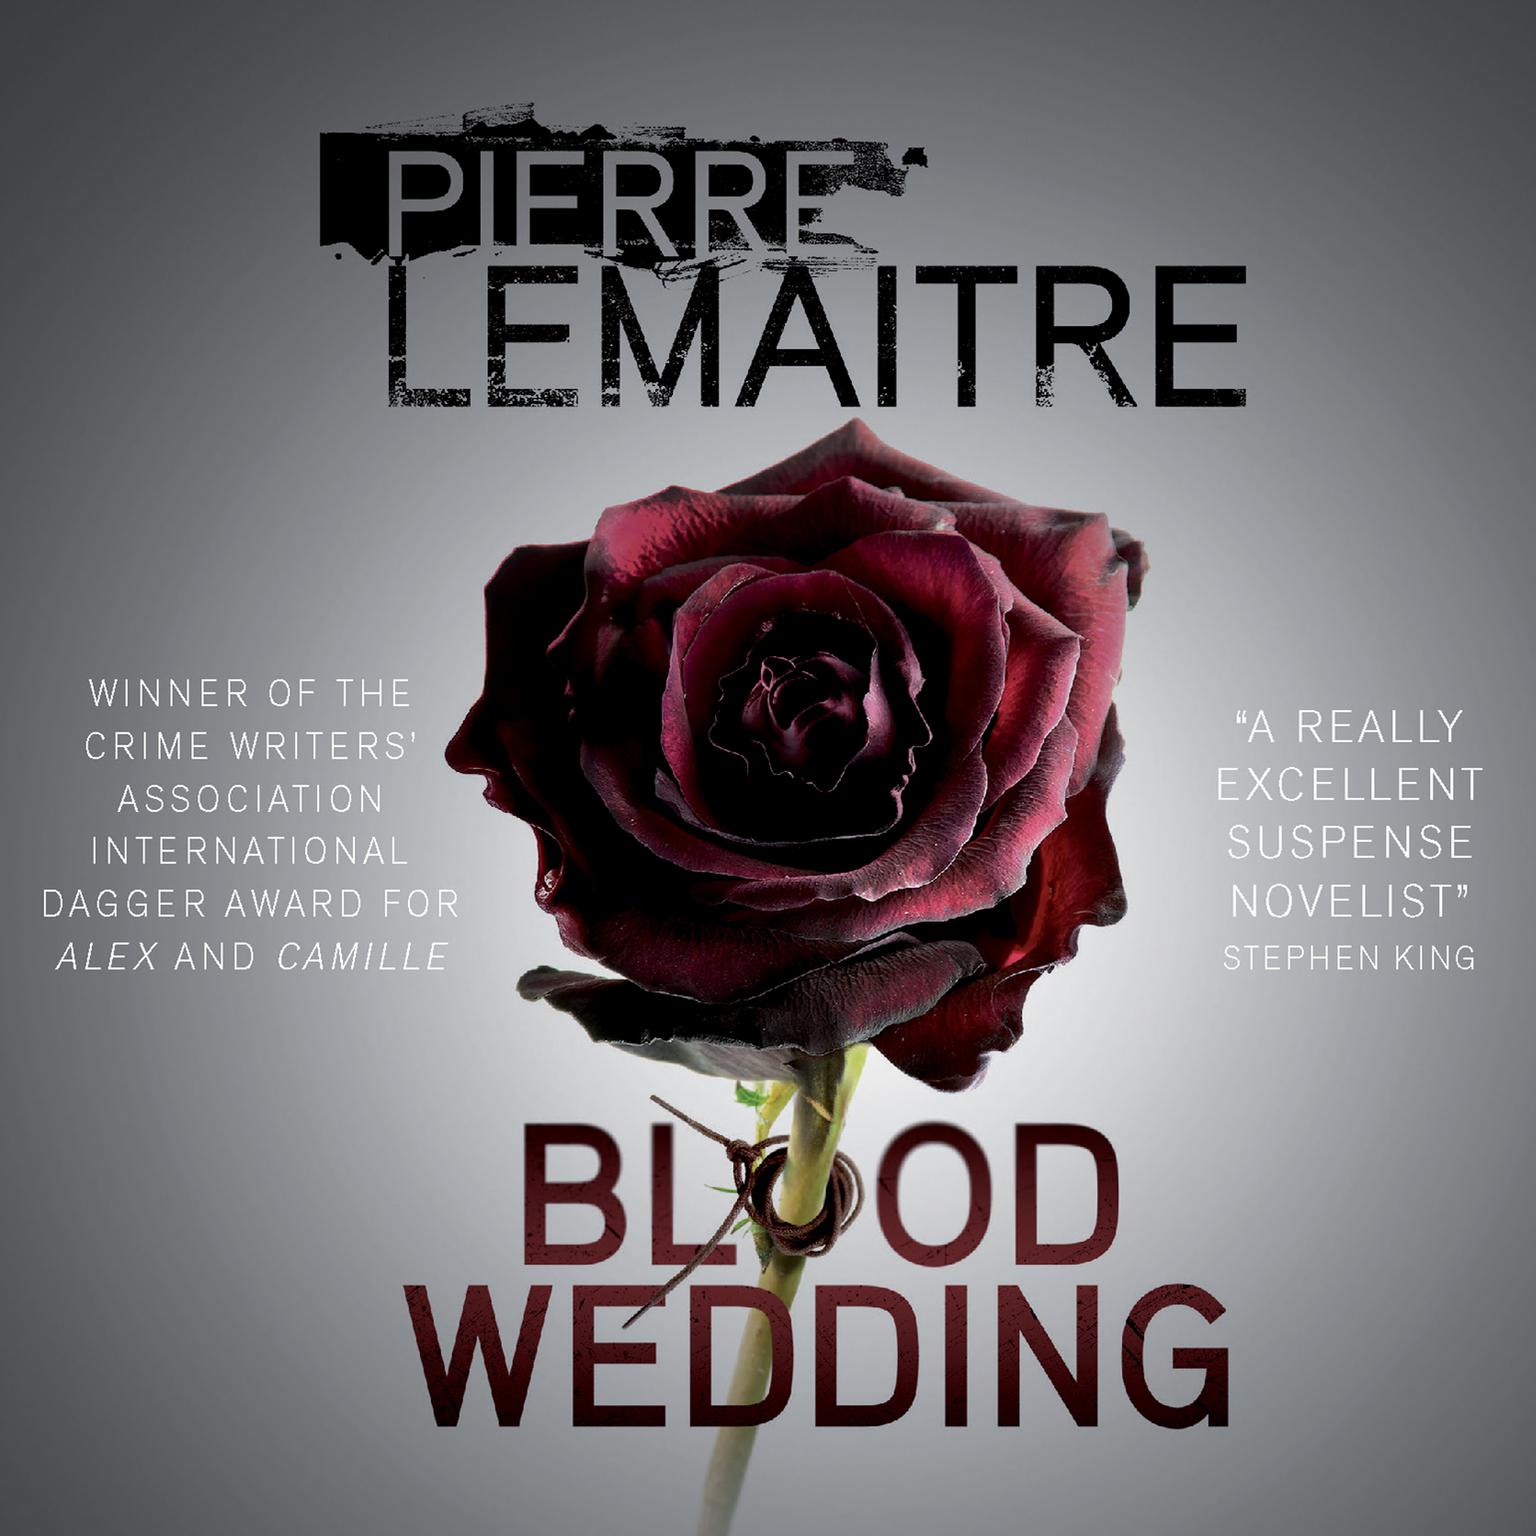 Blood Wedding Audiobook, by Pierre Lemaitre